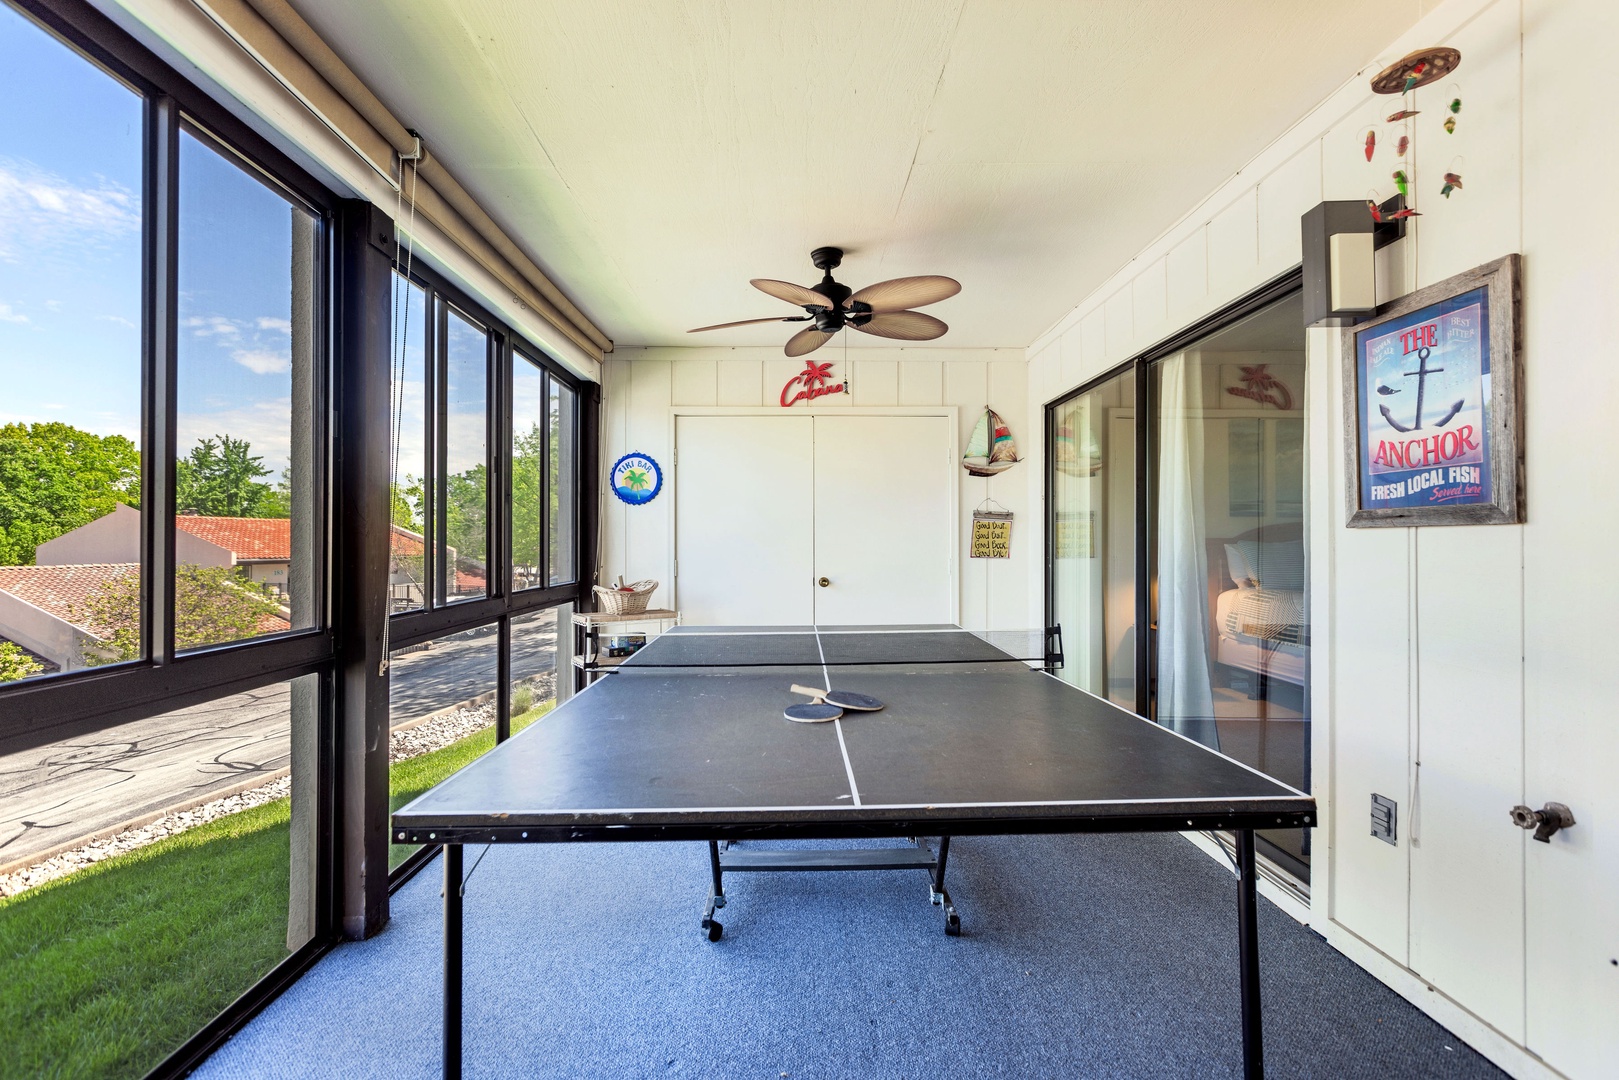 Game on! The 3-seasons deck boasts a ping pong table & ample seating